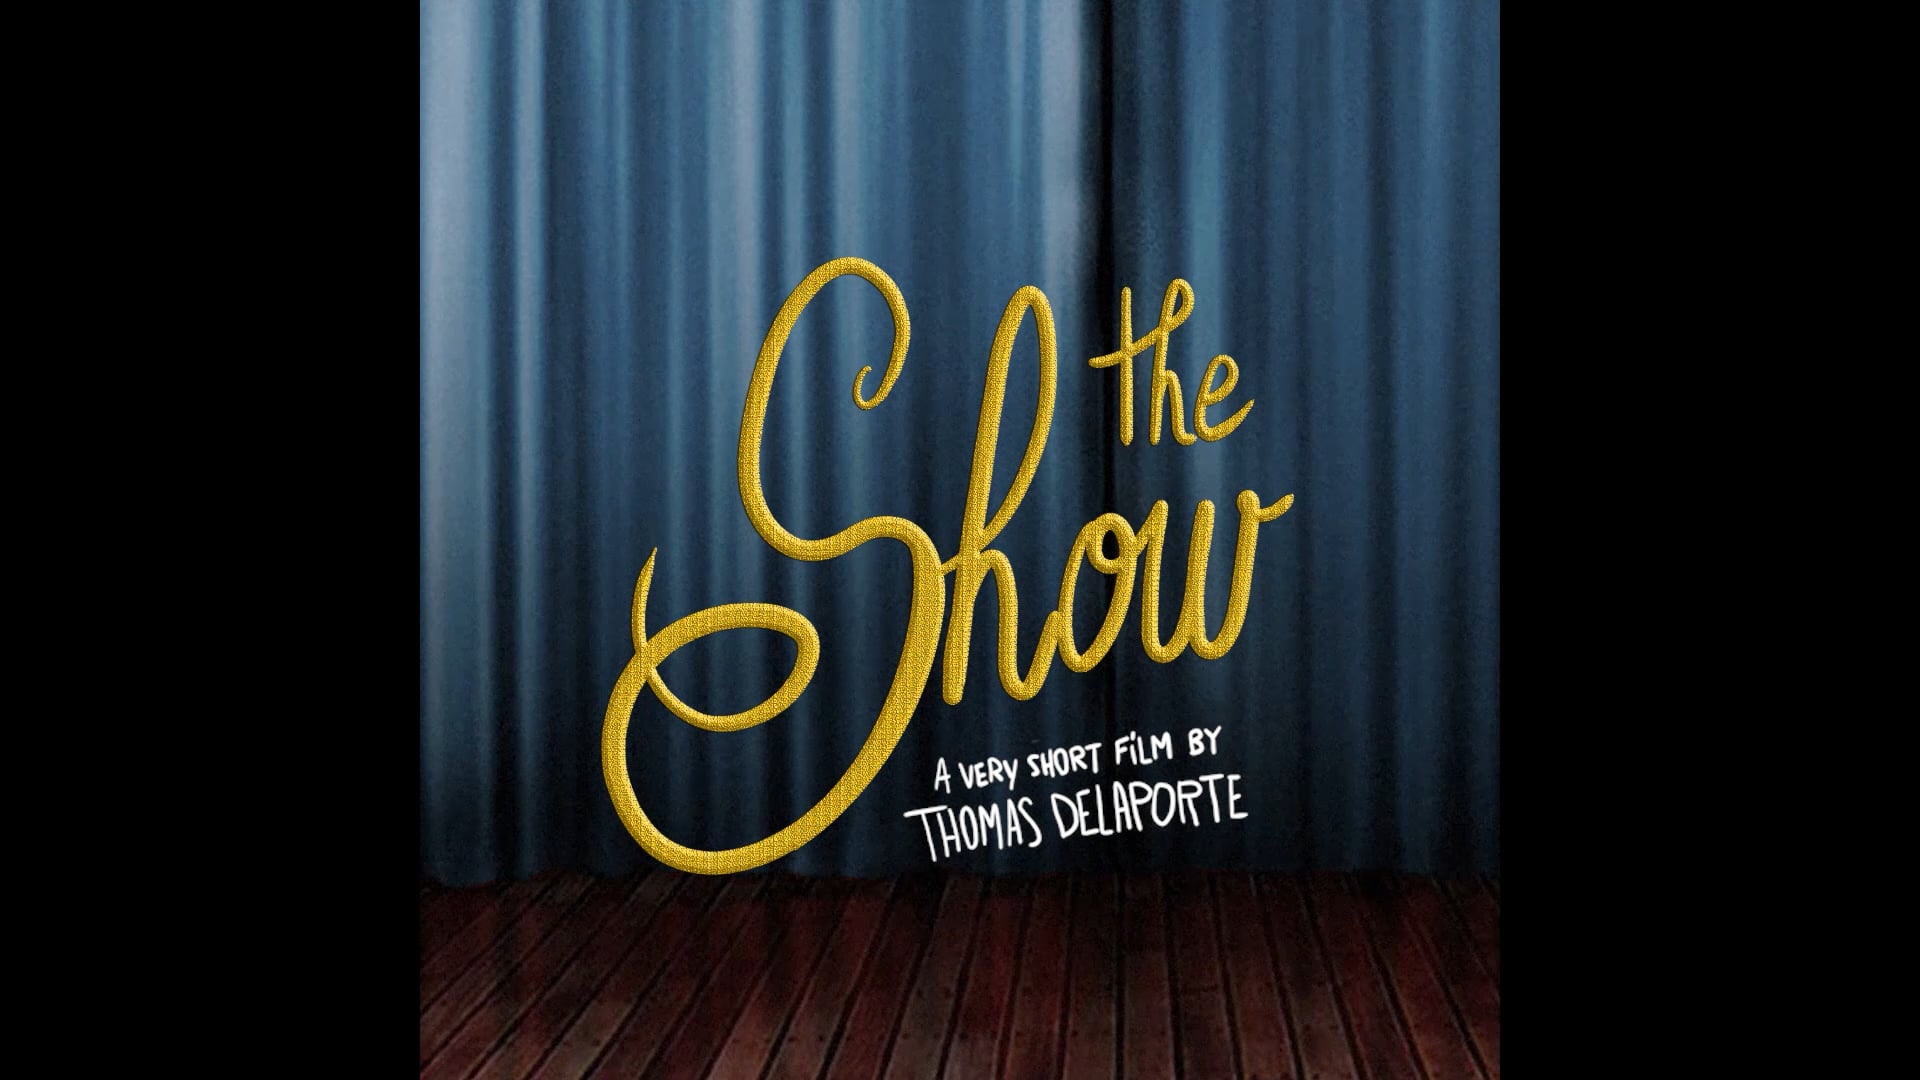 The Show - a very short film